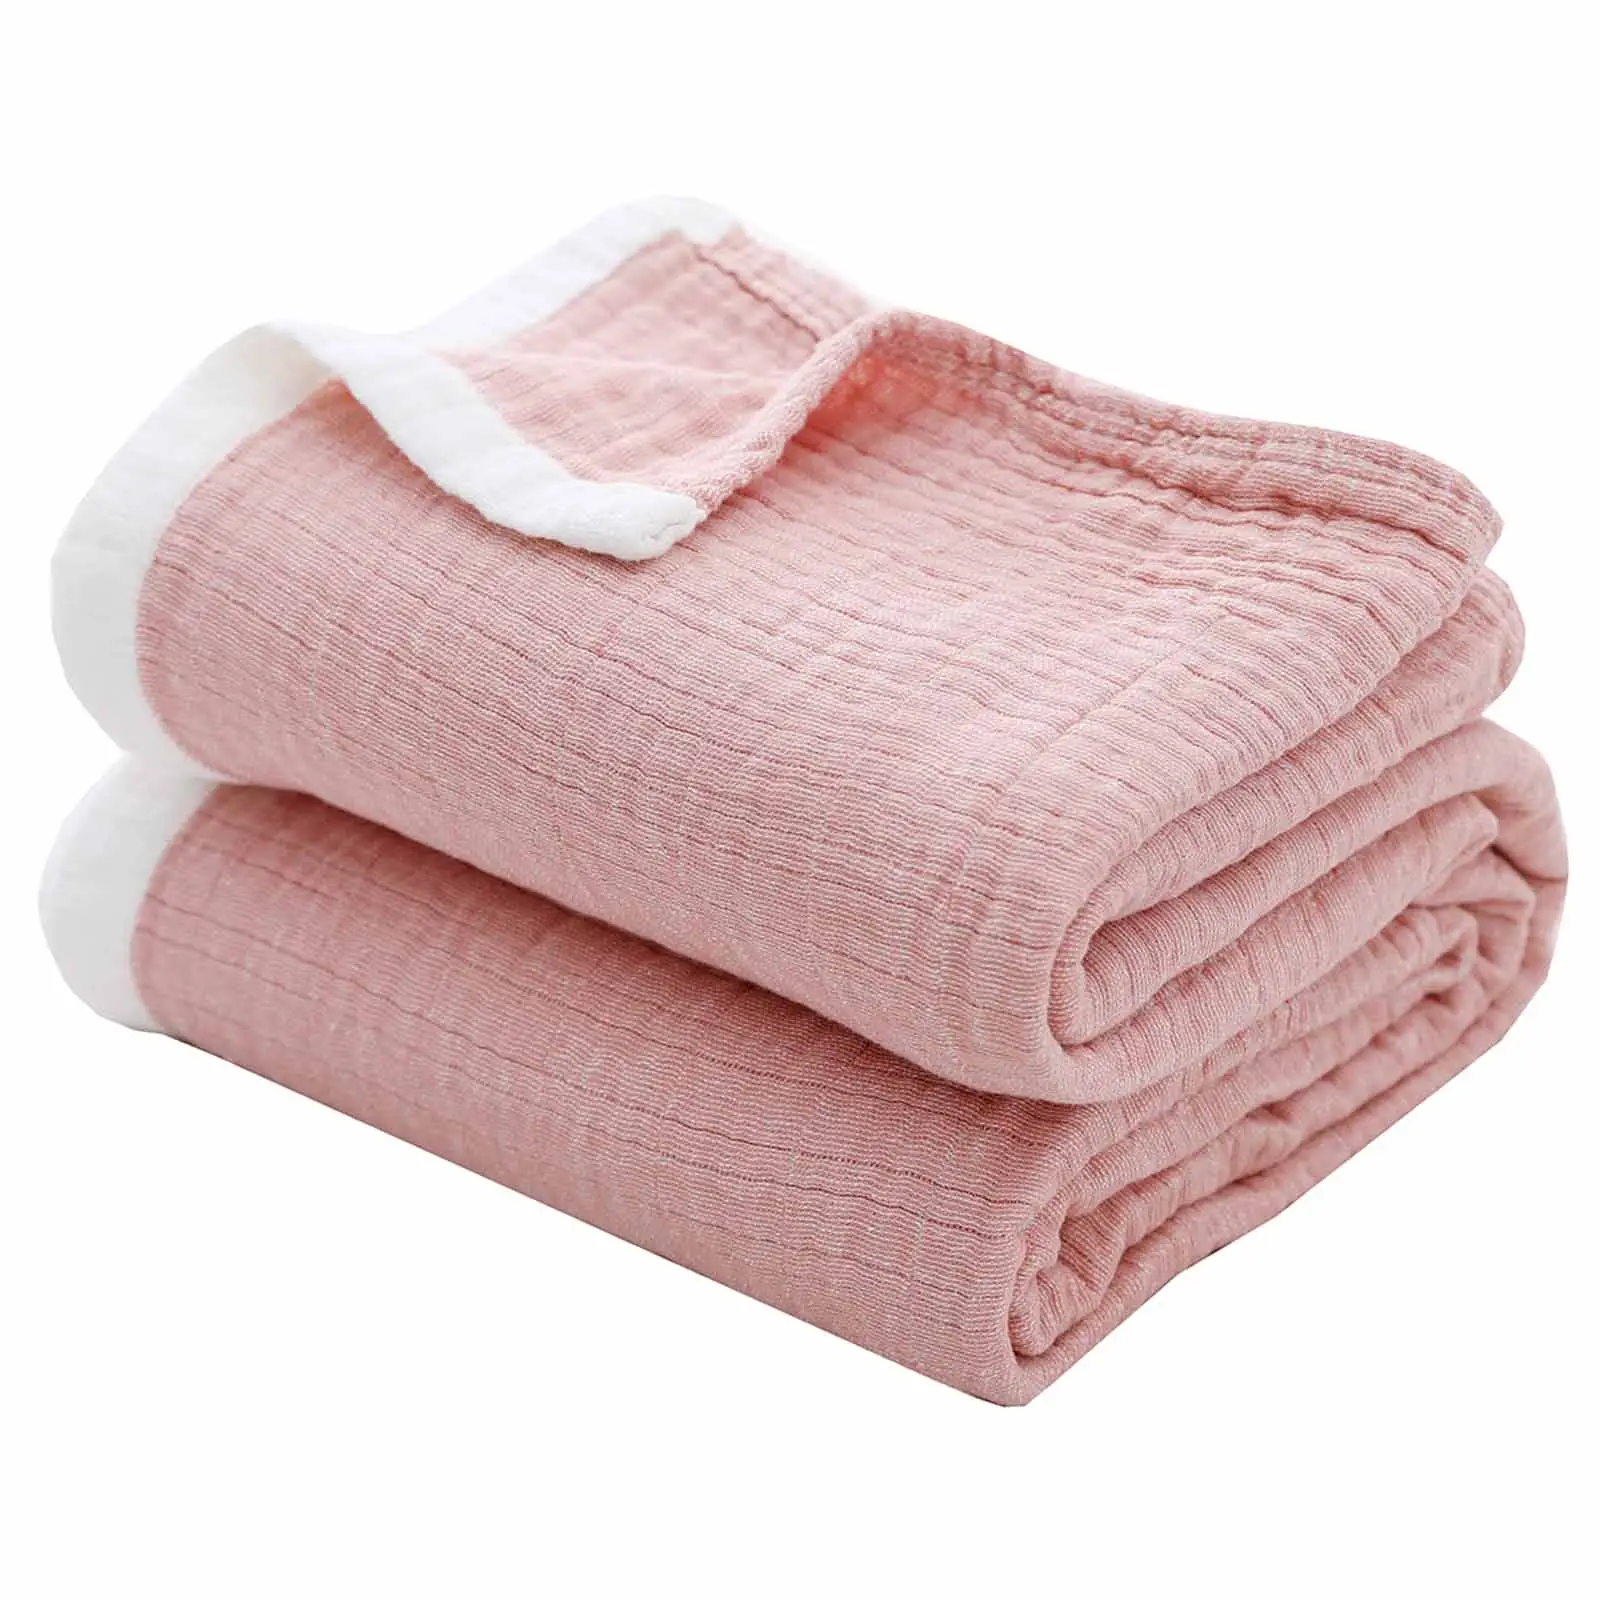 Oeko standard breathable 100% cotton quilted bedding has good water absorption